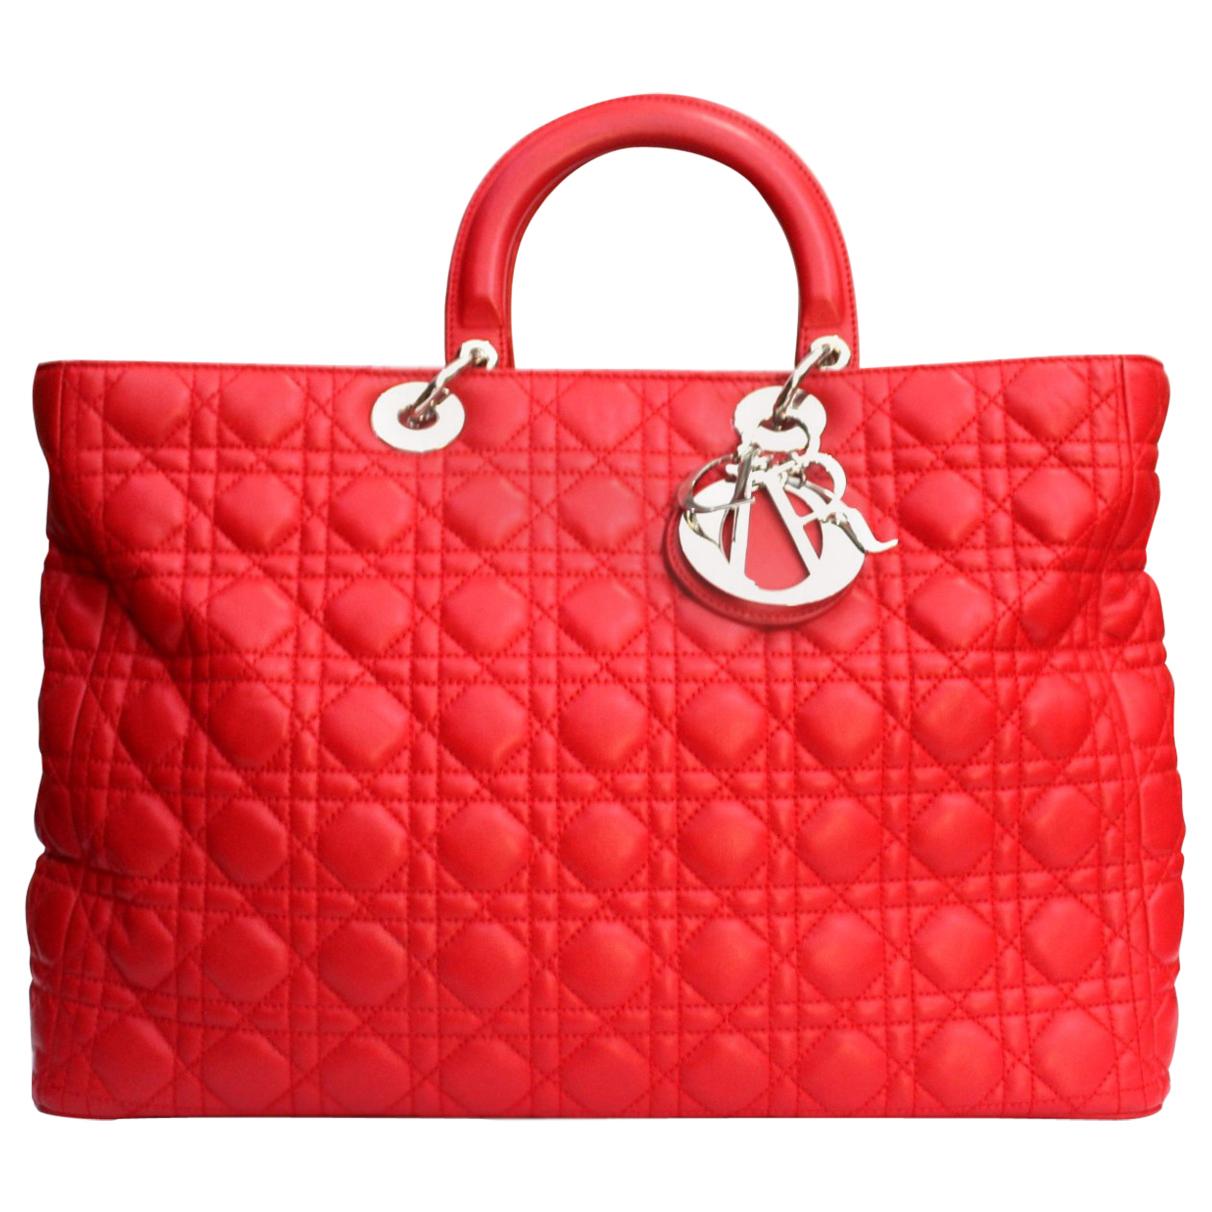 Dior Red Leather Lady Dior Extra Large Bag